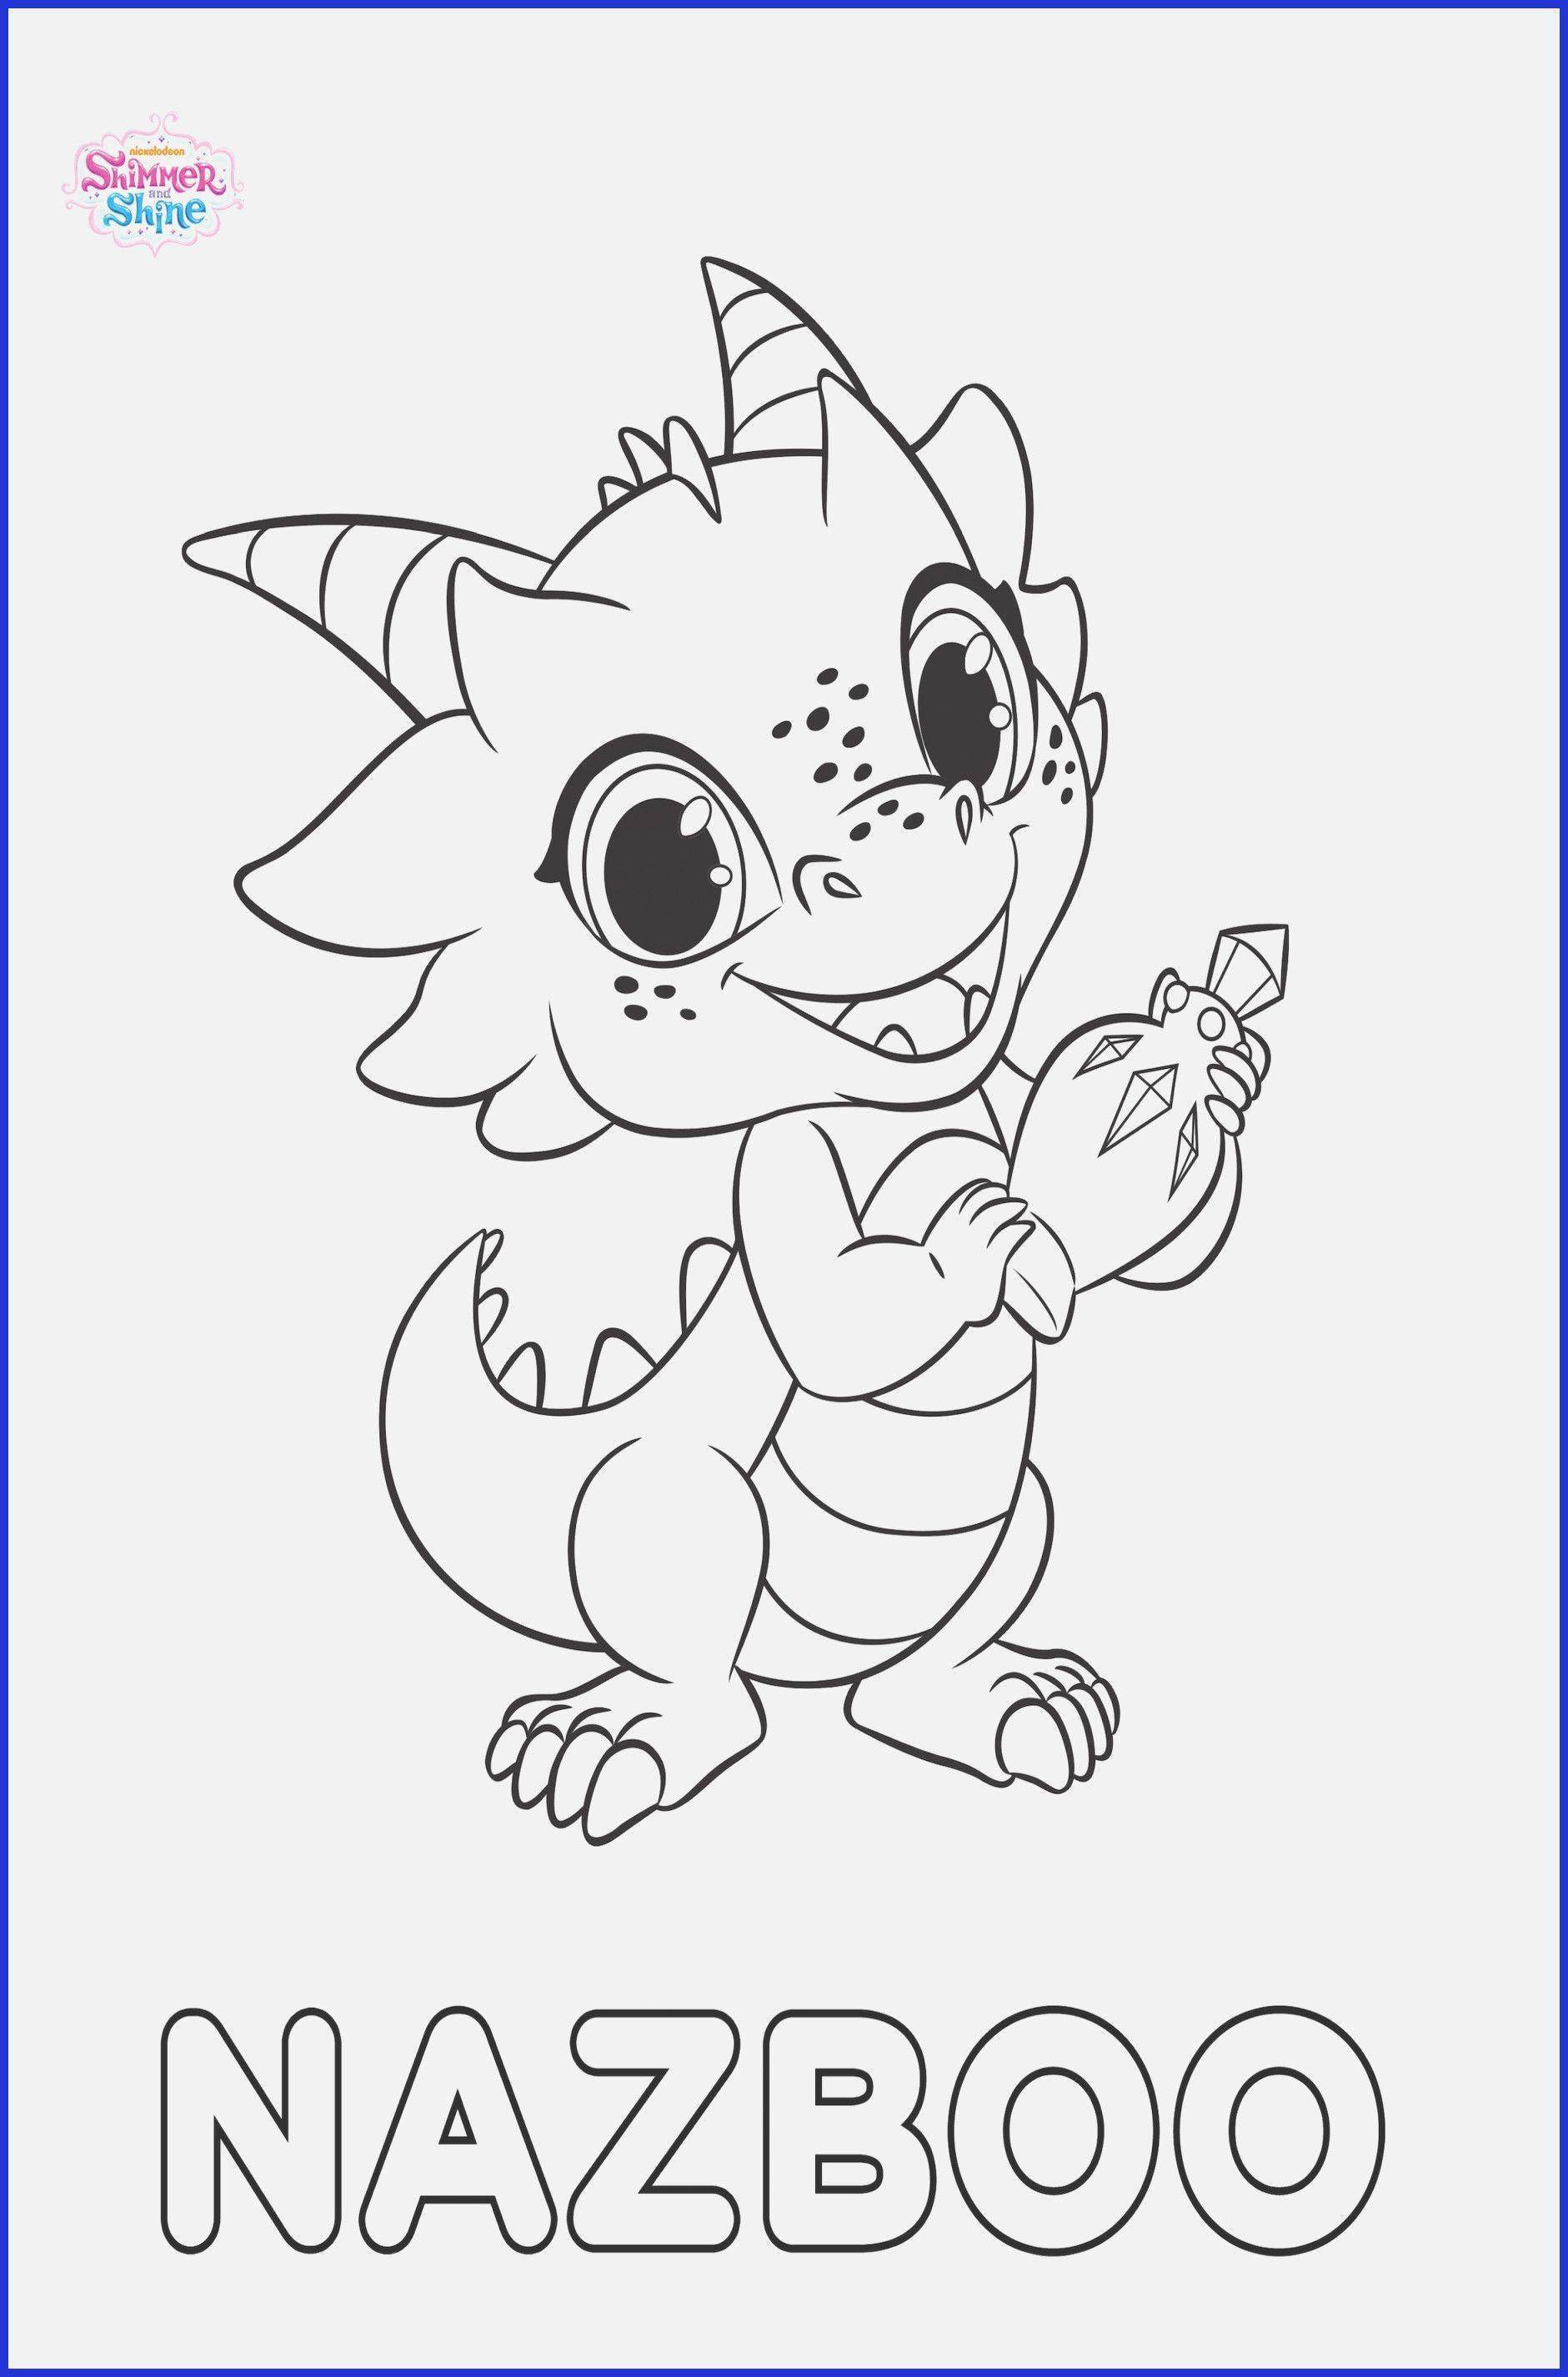 Coloring Pages : Full_shimmer And Shineoloring Page ...